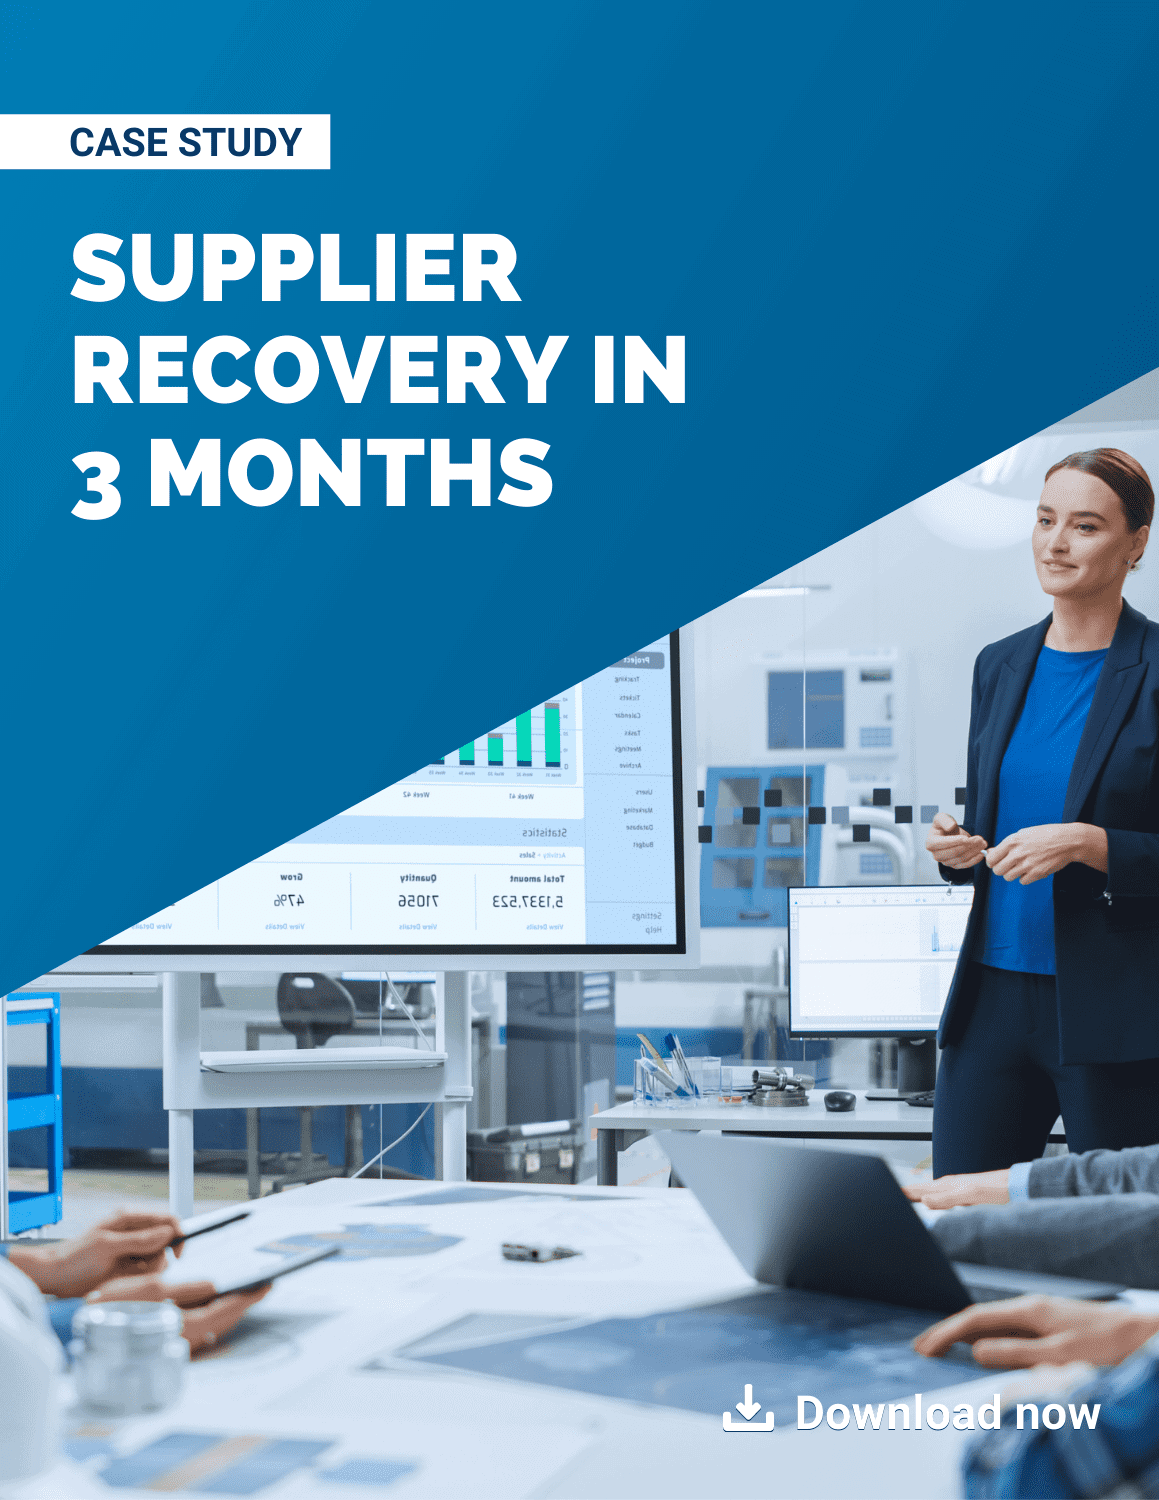 Supplier recovery in 3 months